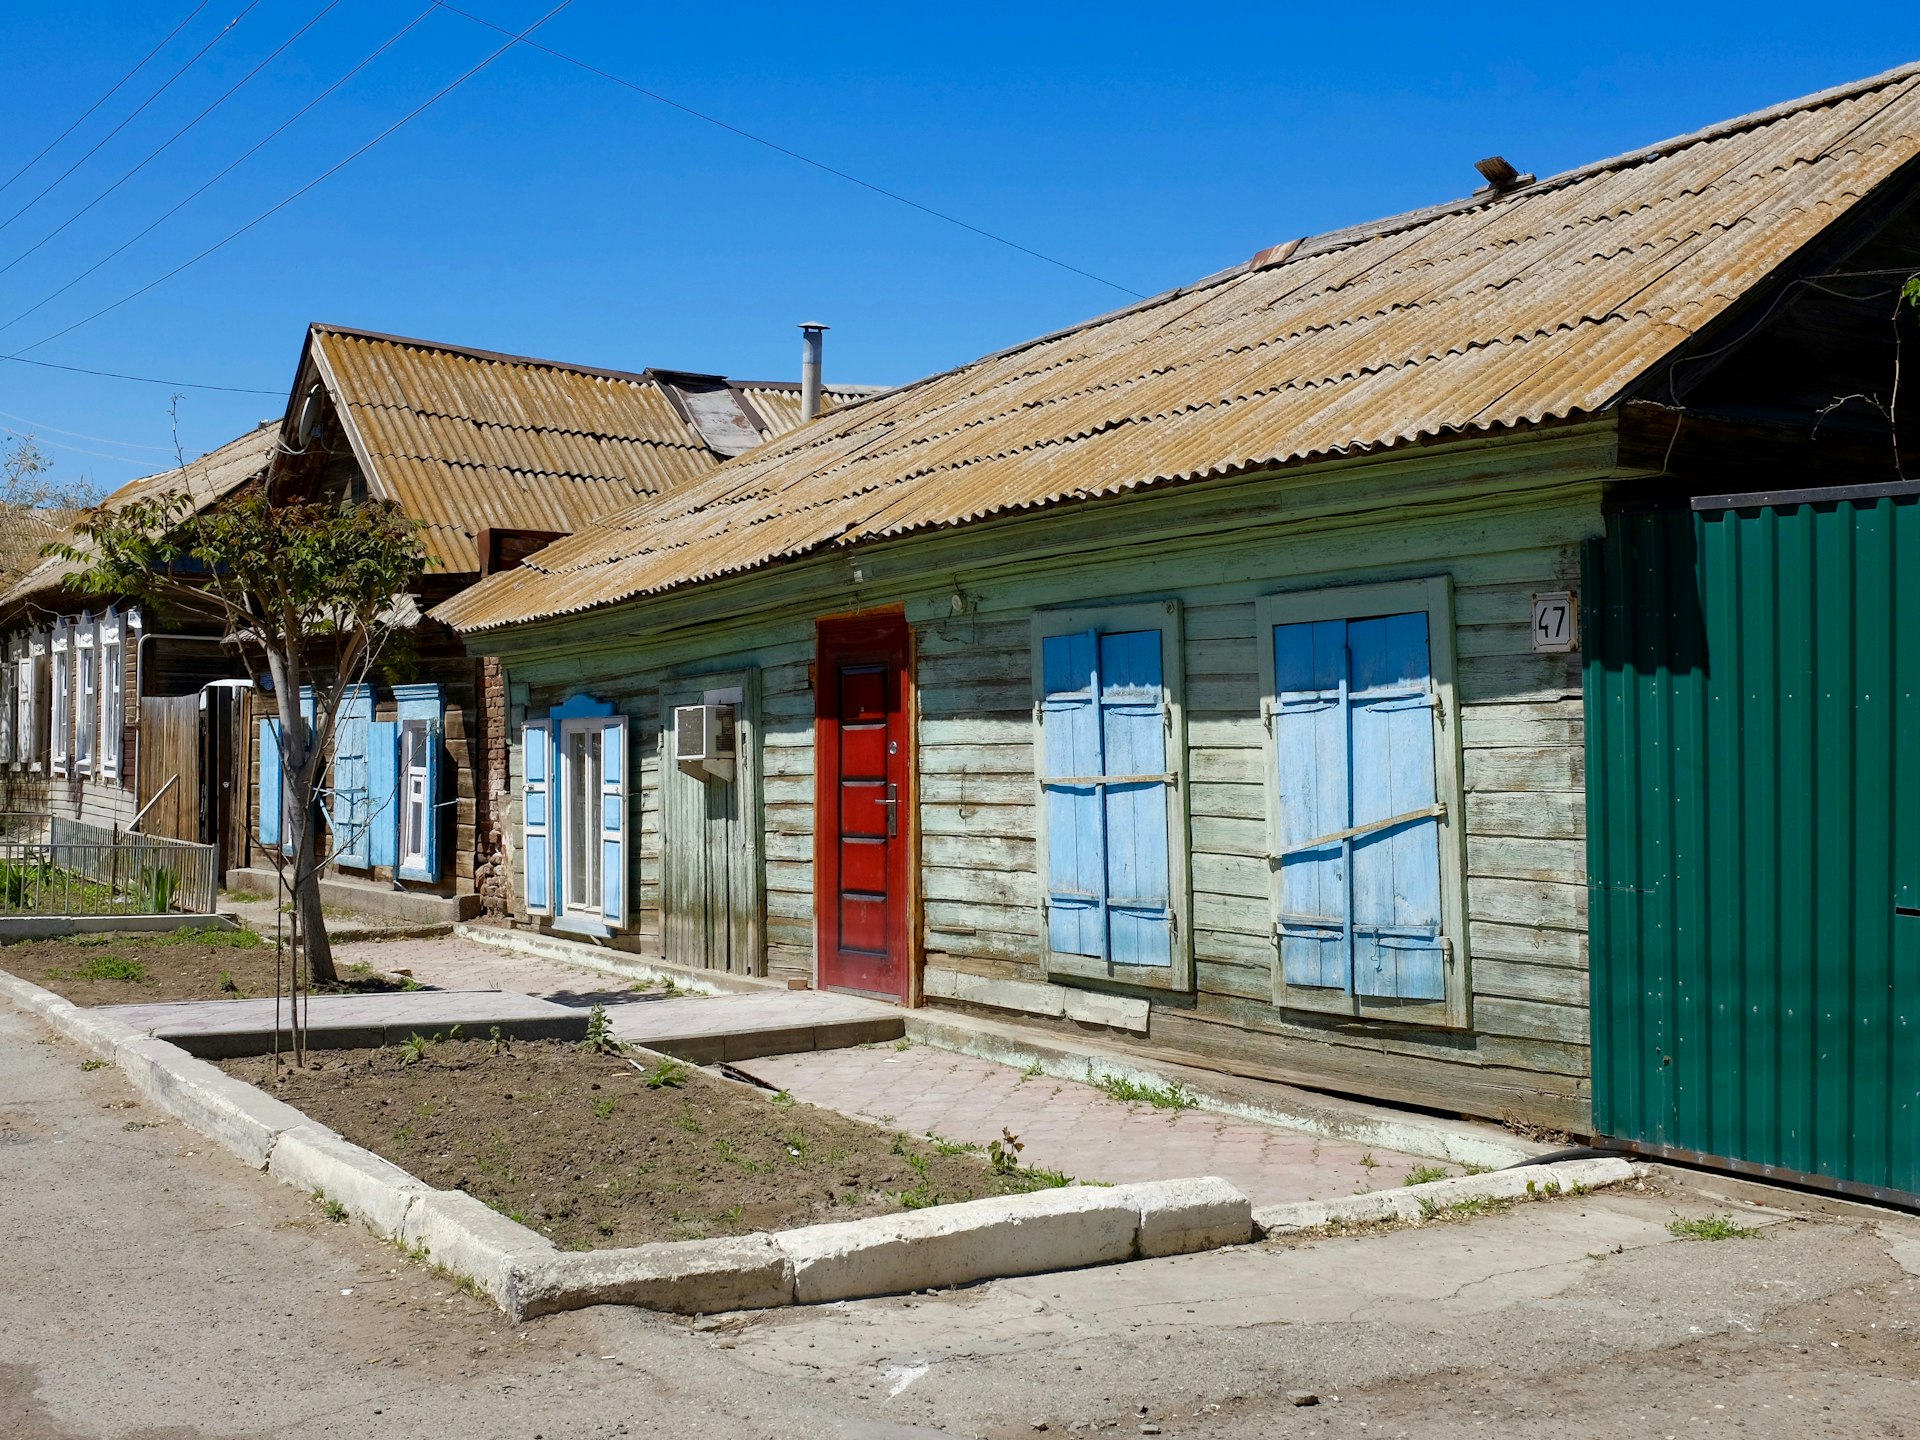 Traditional Tatar housing in ethnically diverse Astrakhan © Mark Baker / Lonely Planet